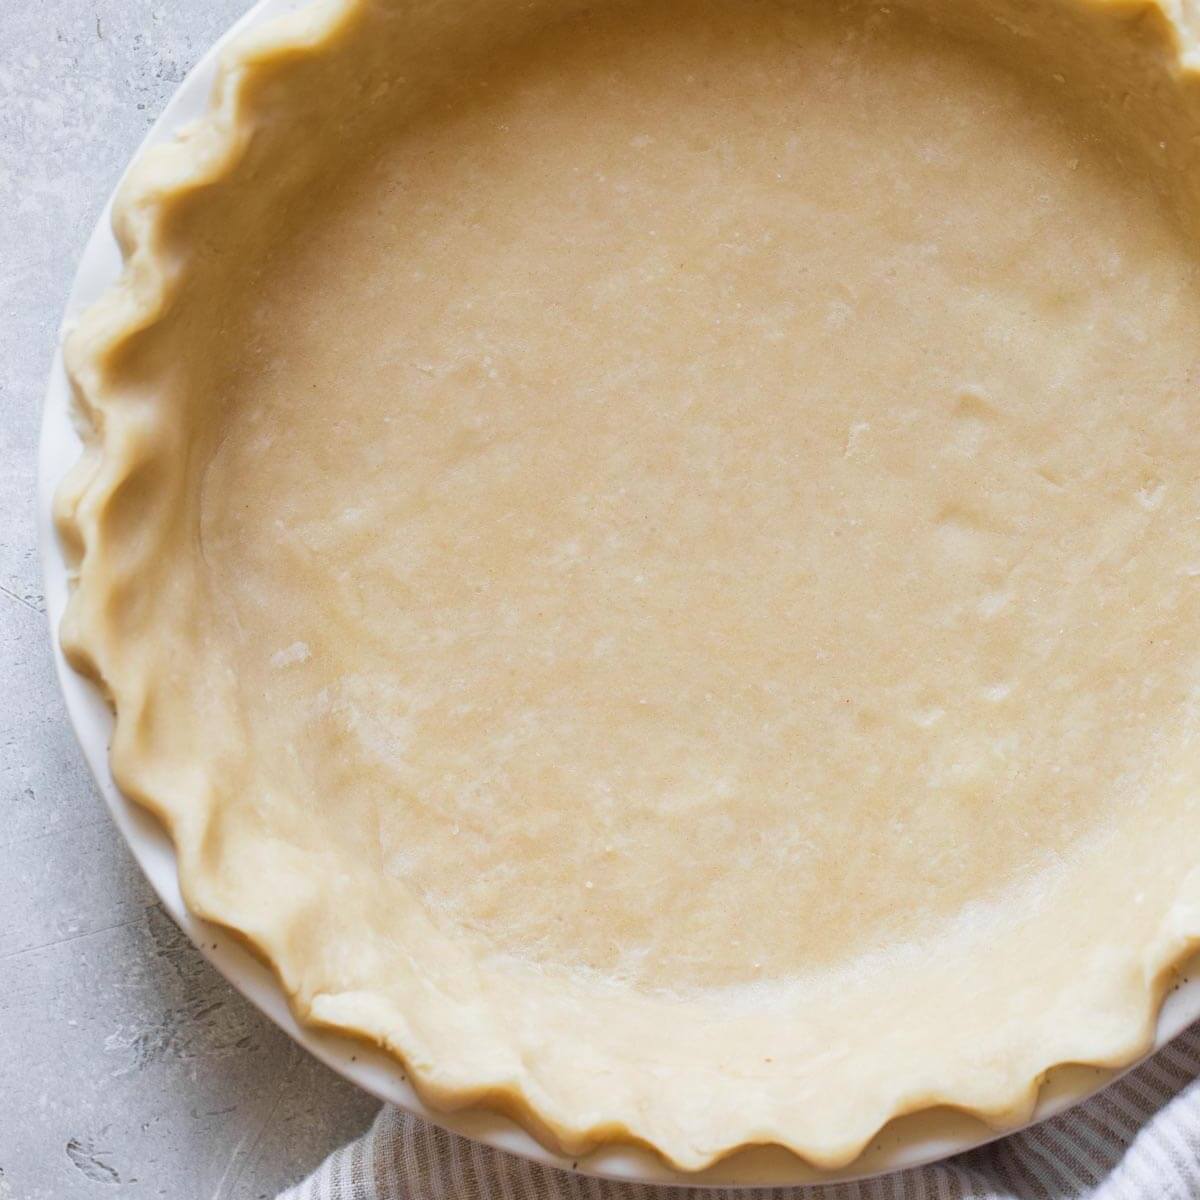 You, too, can look like a pie-making pro. (This kit can help